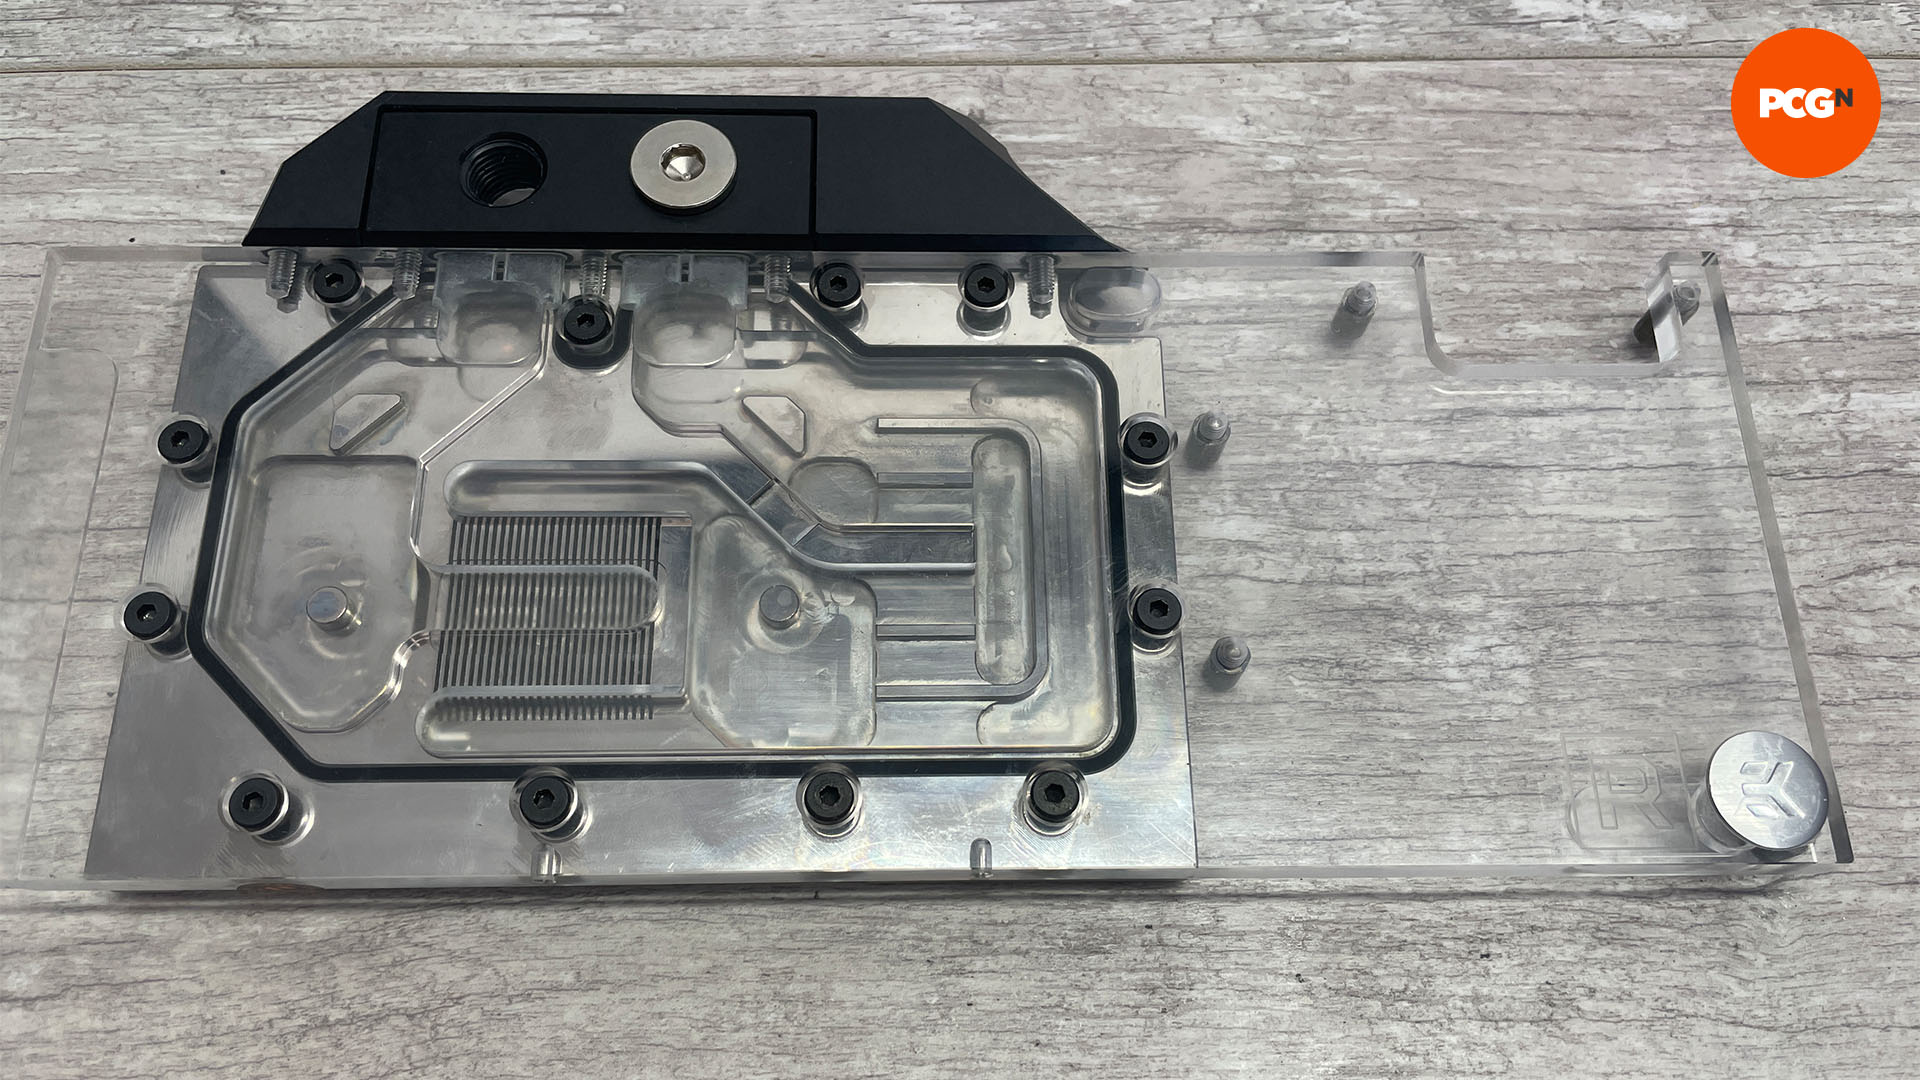 How to clean a waterblock: Reassemble block